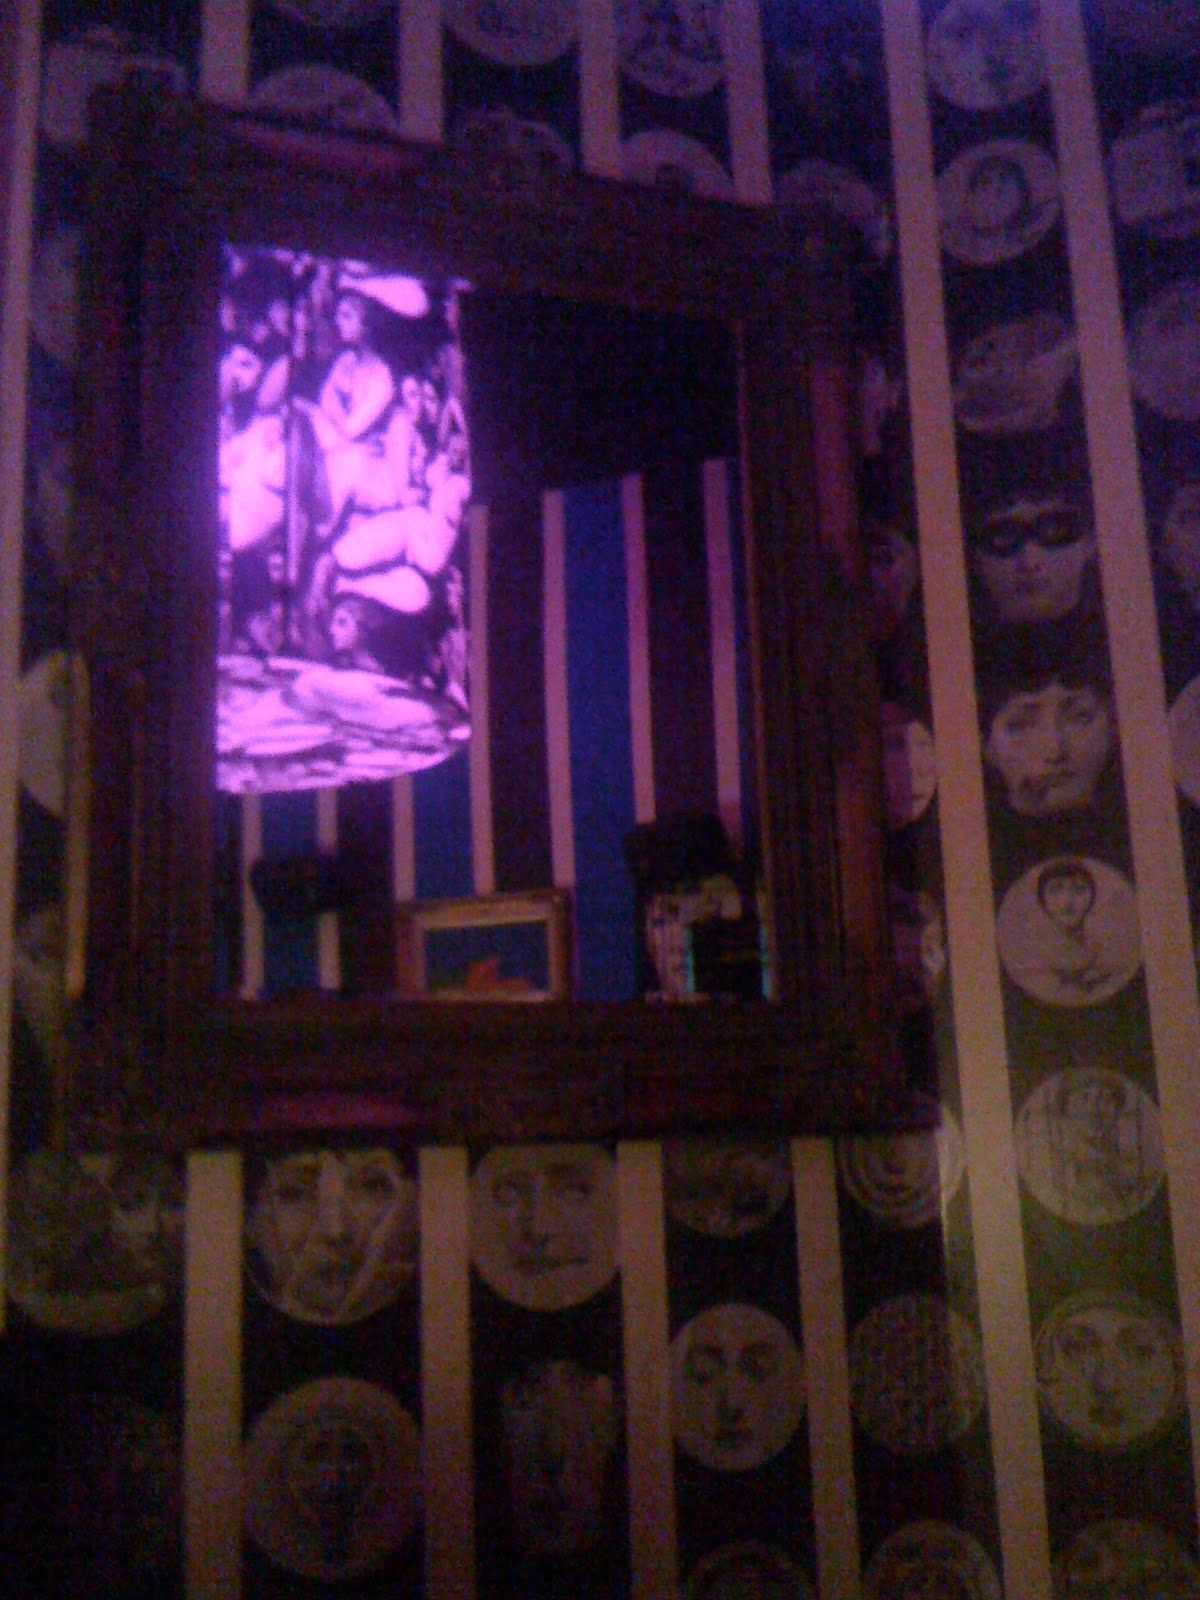 Essentially they have a room that's covered in wallpaper of Fornasetti's 